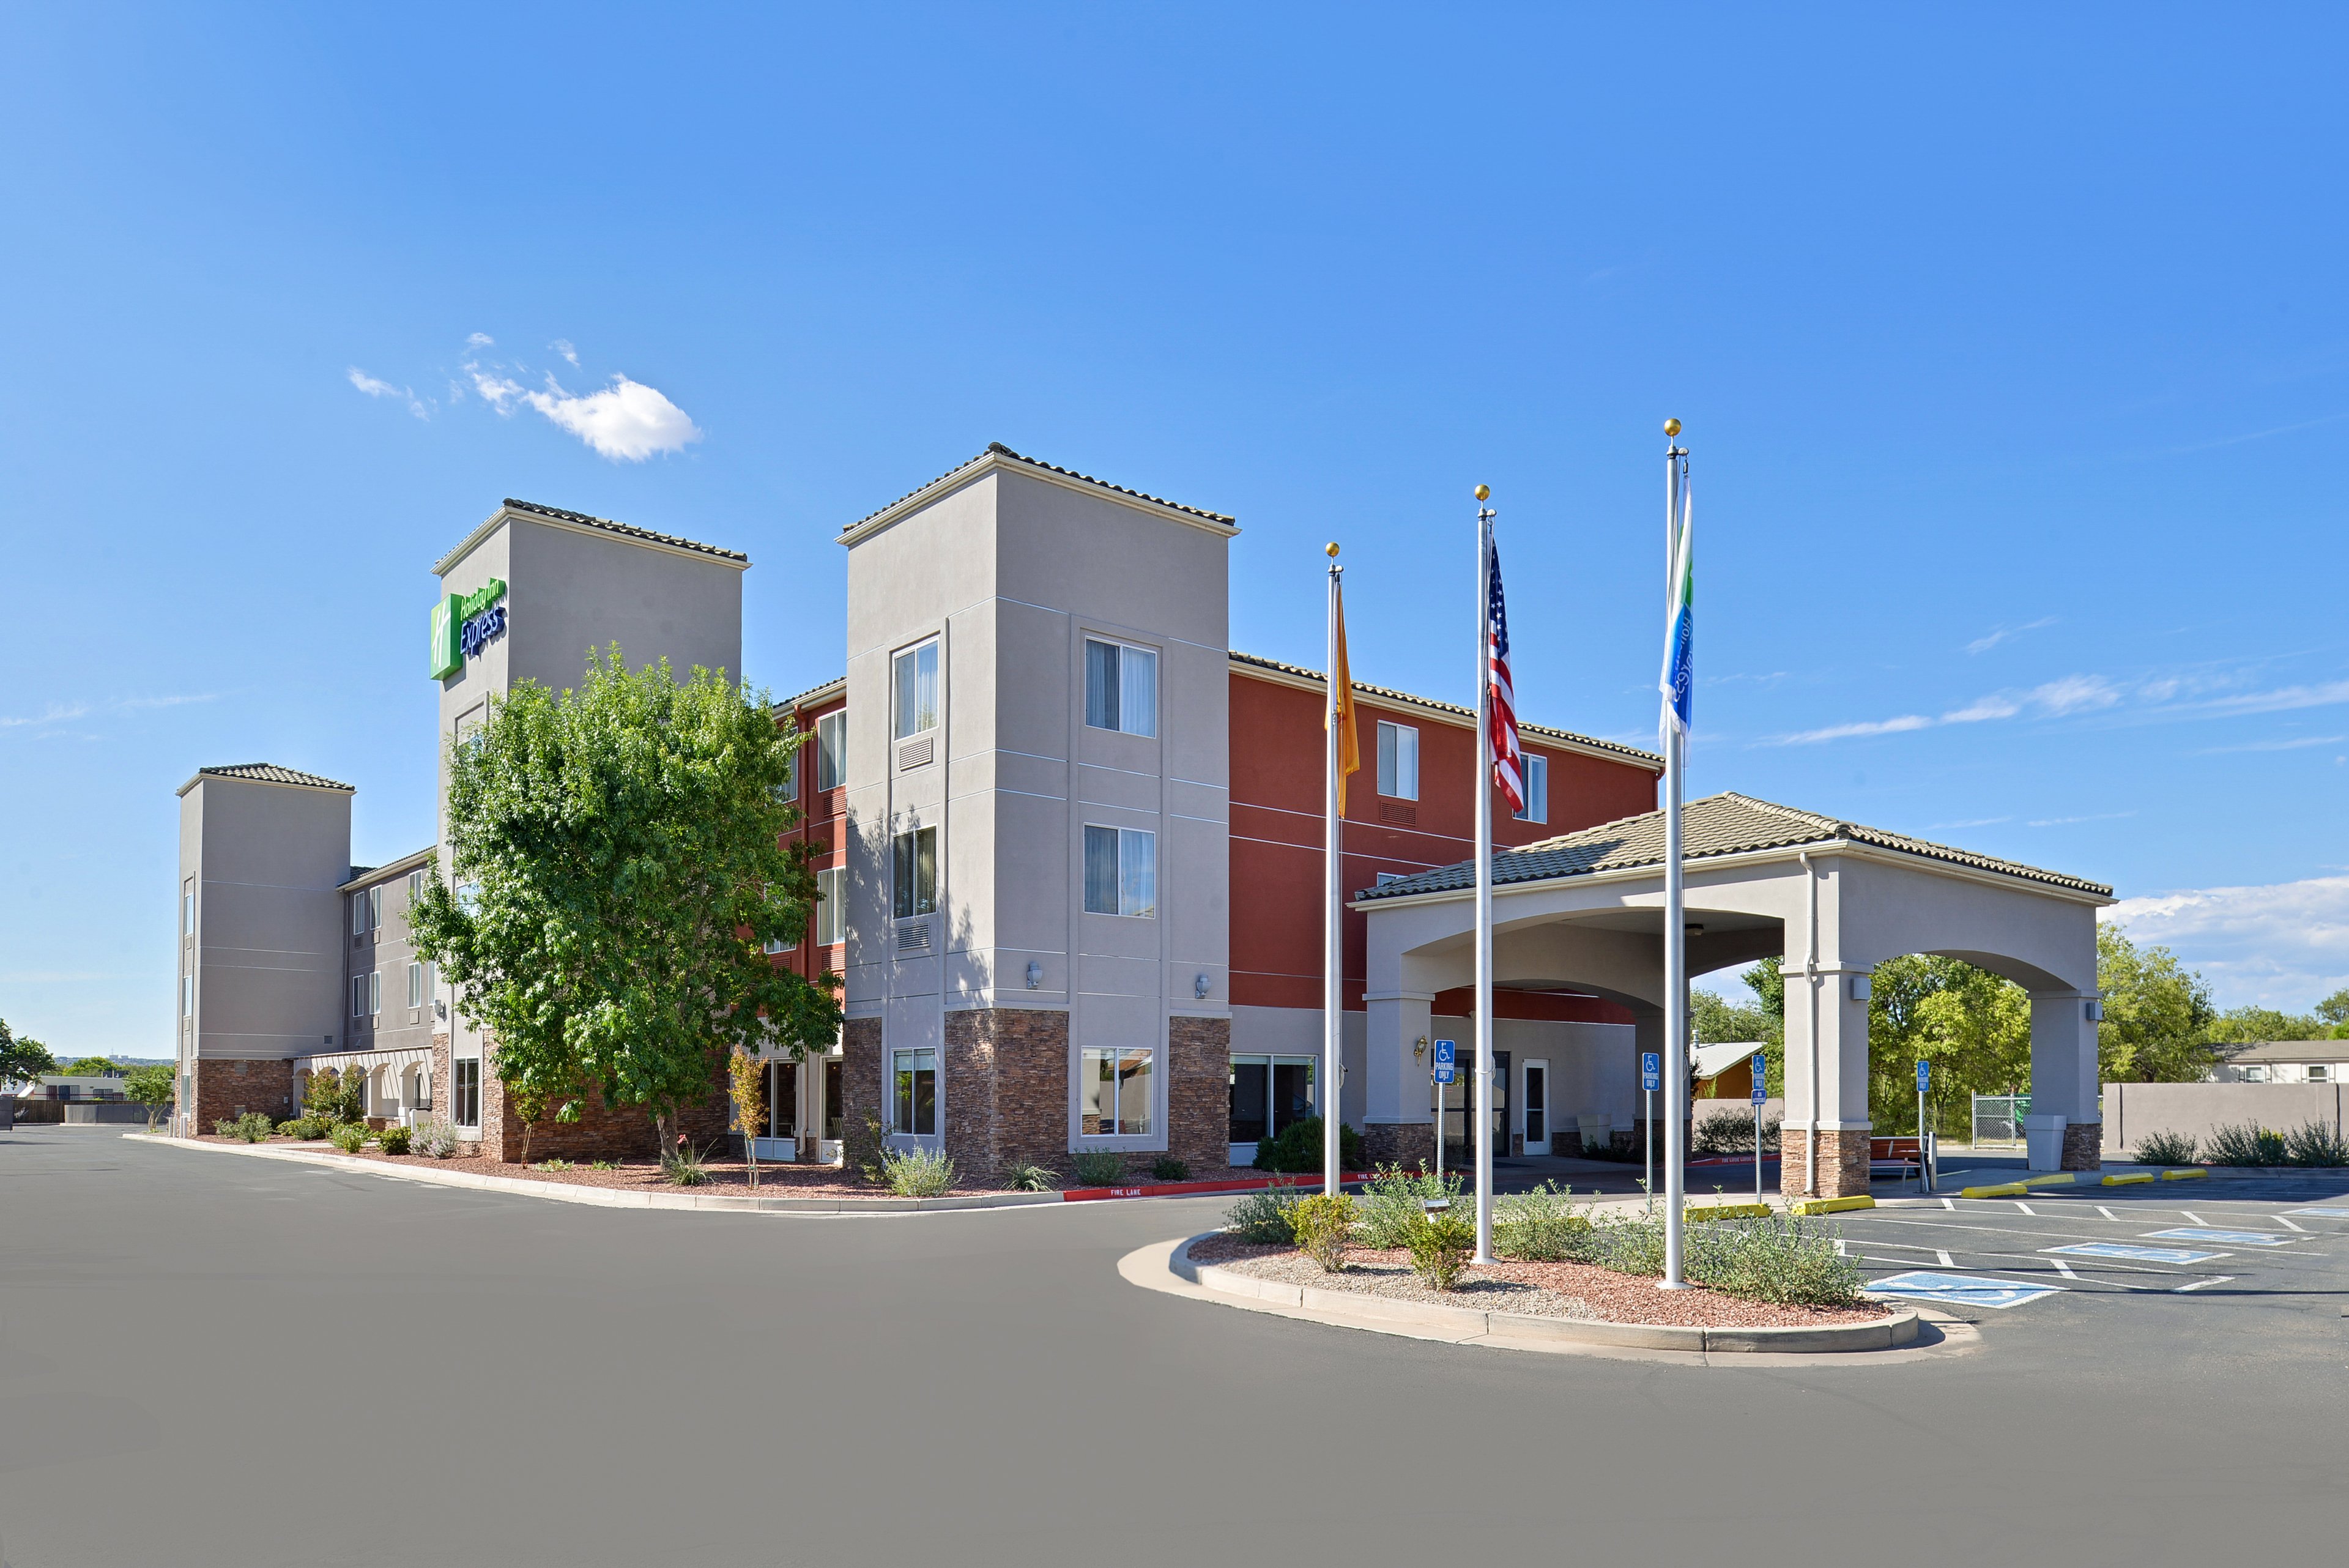 Welcome to the Holiday Inn Express Bernalillo NM!